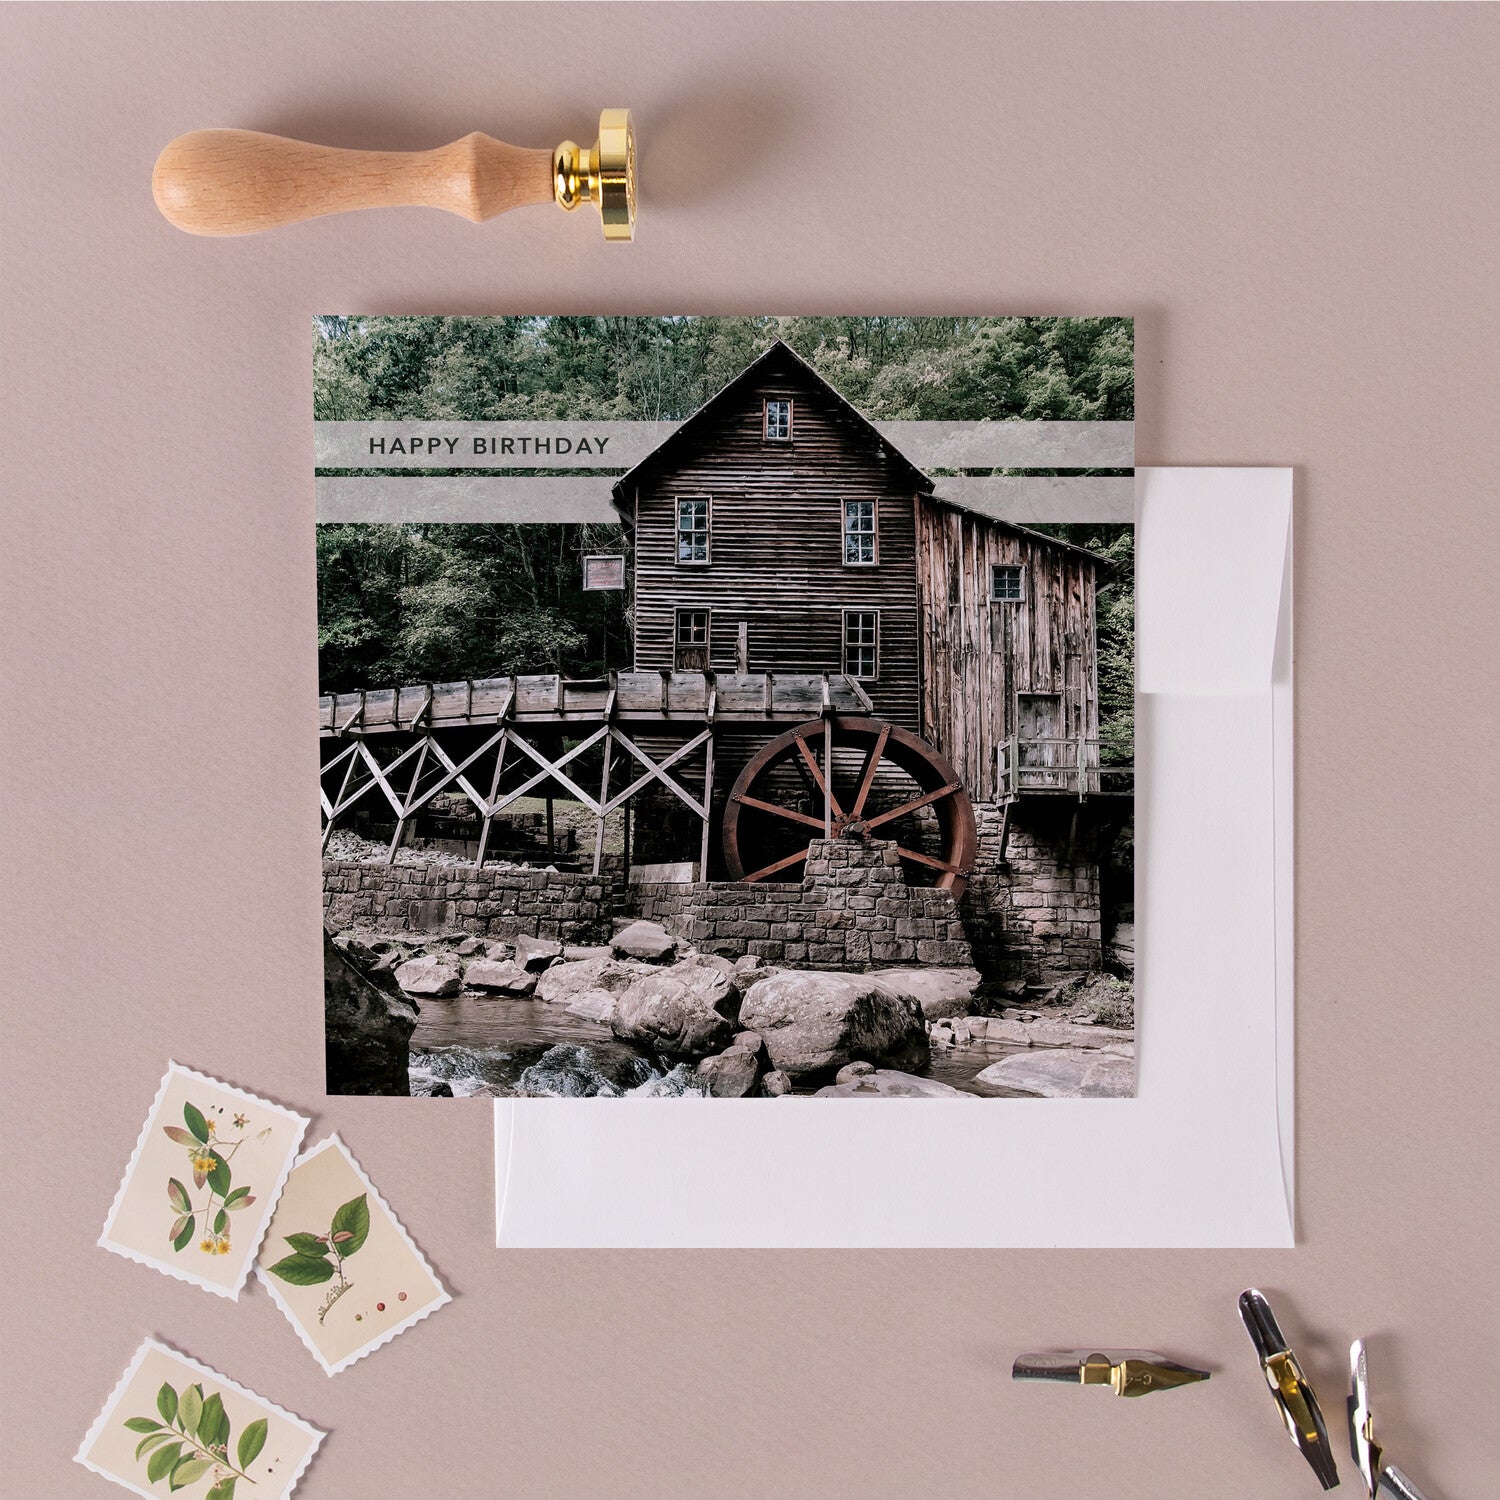 Old Water Mill Birthday Greeting Card